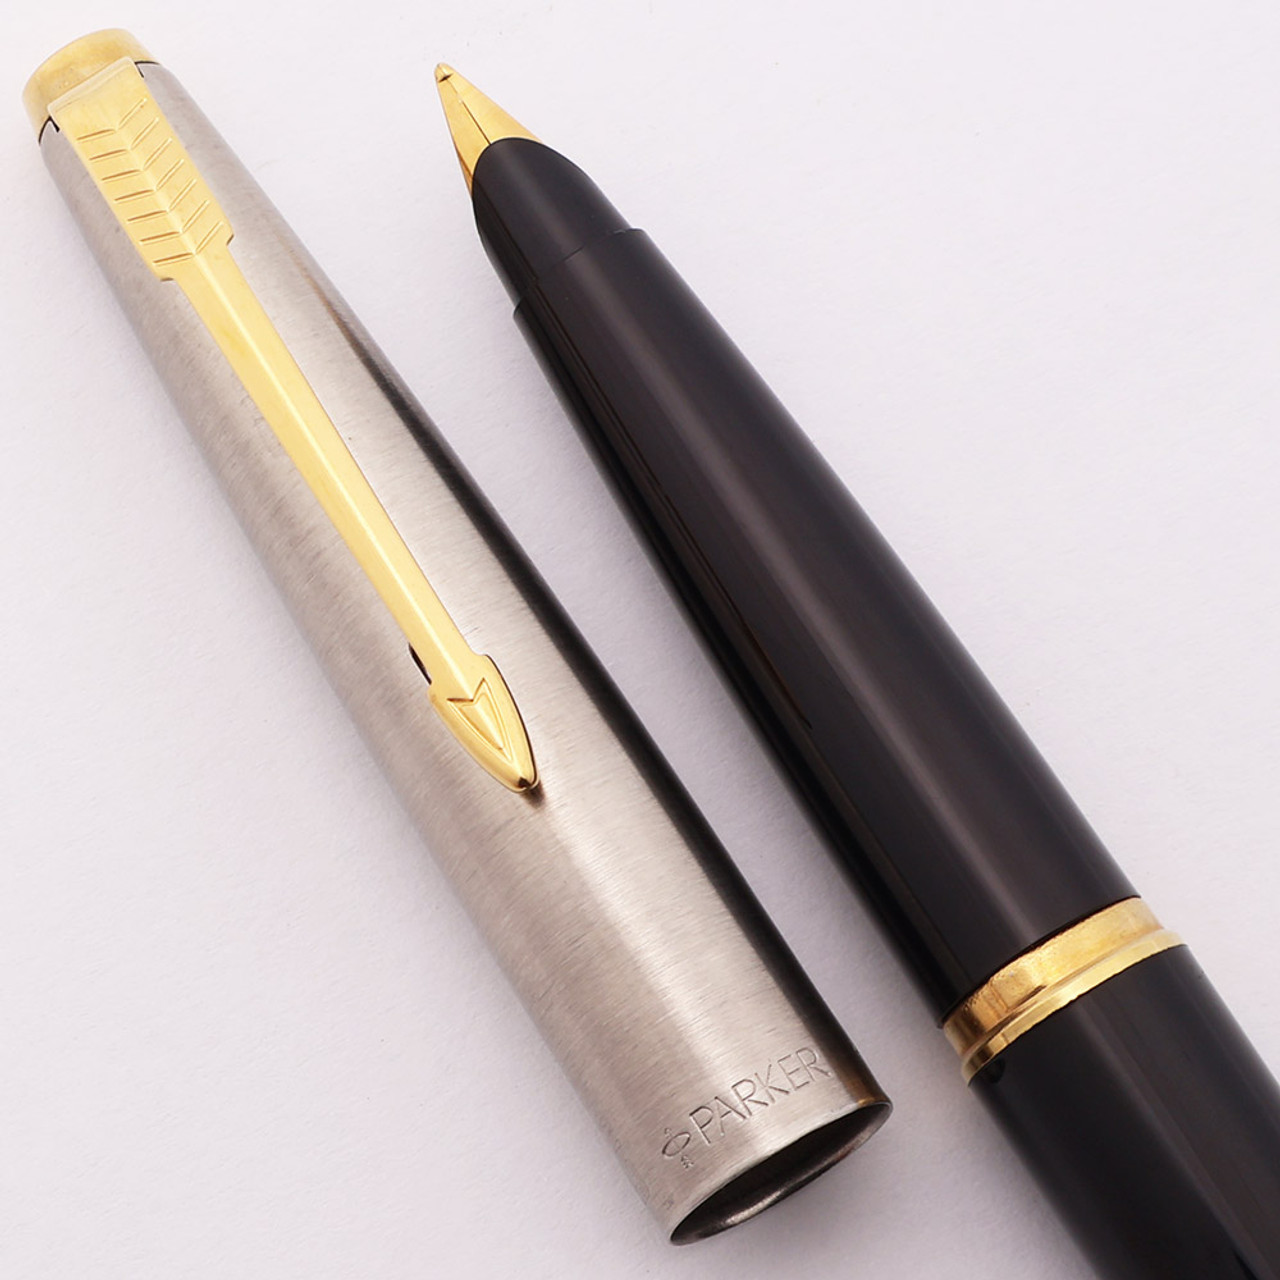 Parker 45 Flighter Deluxe Fountain Pen (1970-79) - Brushed Chrome w/Gold Trim, C/C, Medium Gold Plated Nib  (Excellent, Works Well)